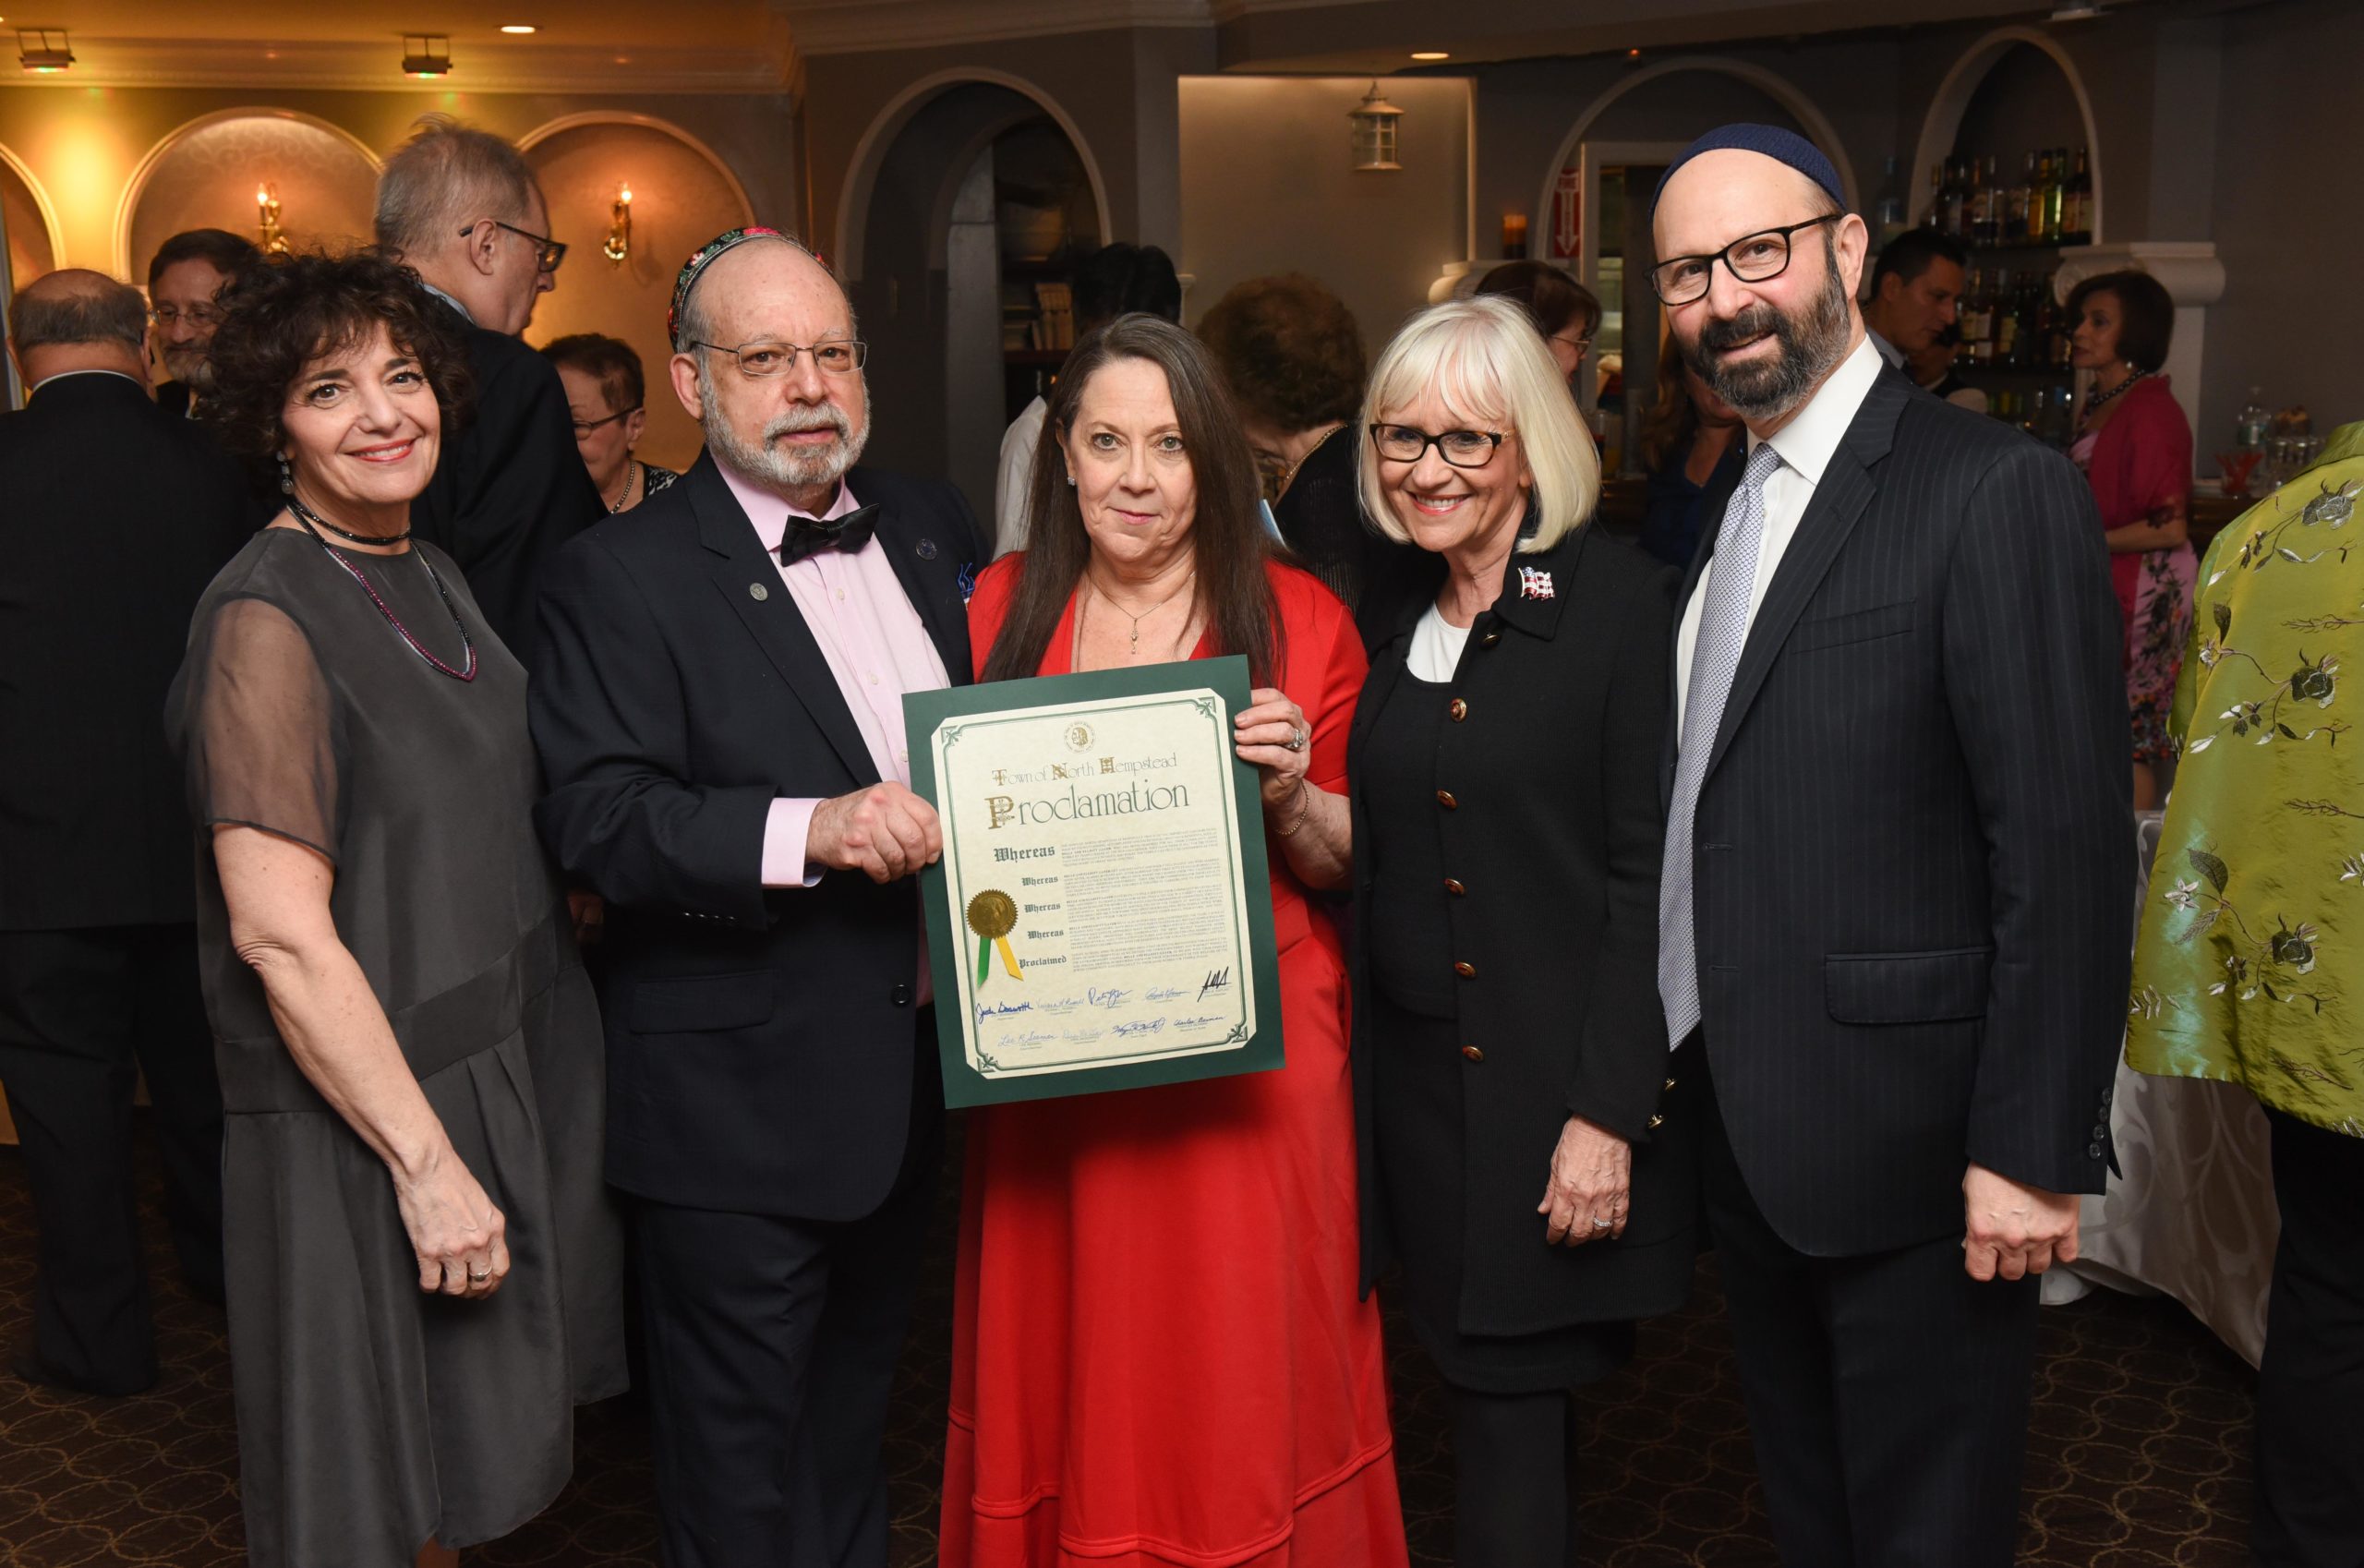 Cantor Leslie Friedlander, Elliott Gayer, Belle Gayer, Supervisor Judi Bosworth and Rabbi Jerry Blum at Temple Isaiah of Great Neck’s annual dinner dance. (Photo courtesy of the Town of North Hempstead)